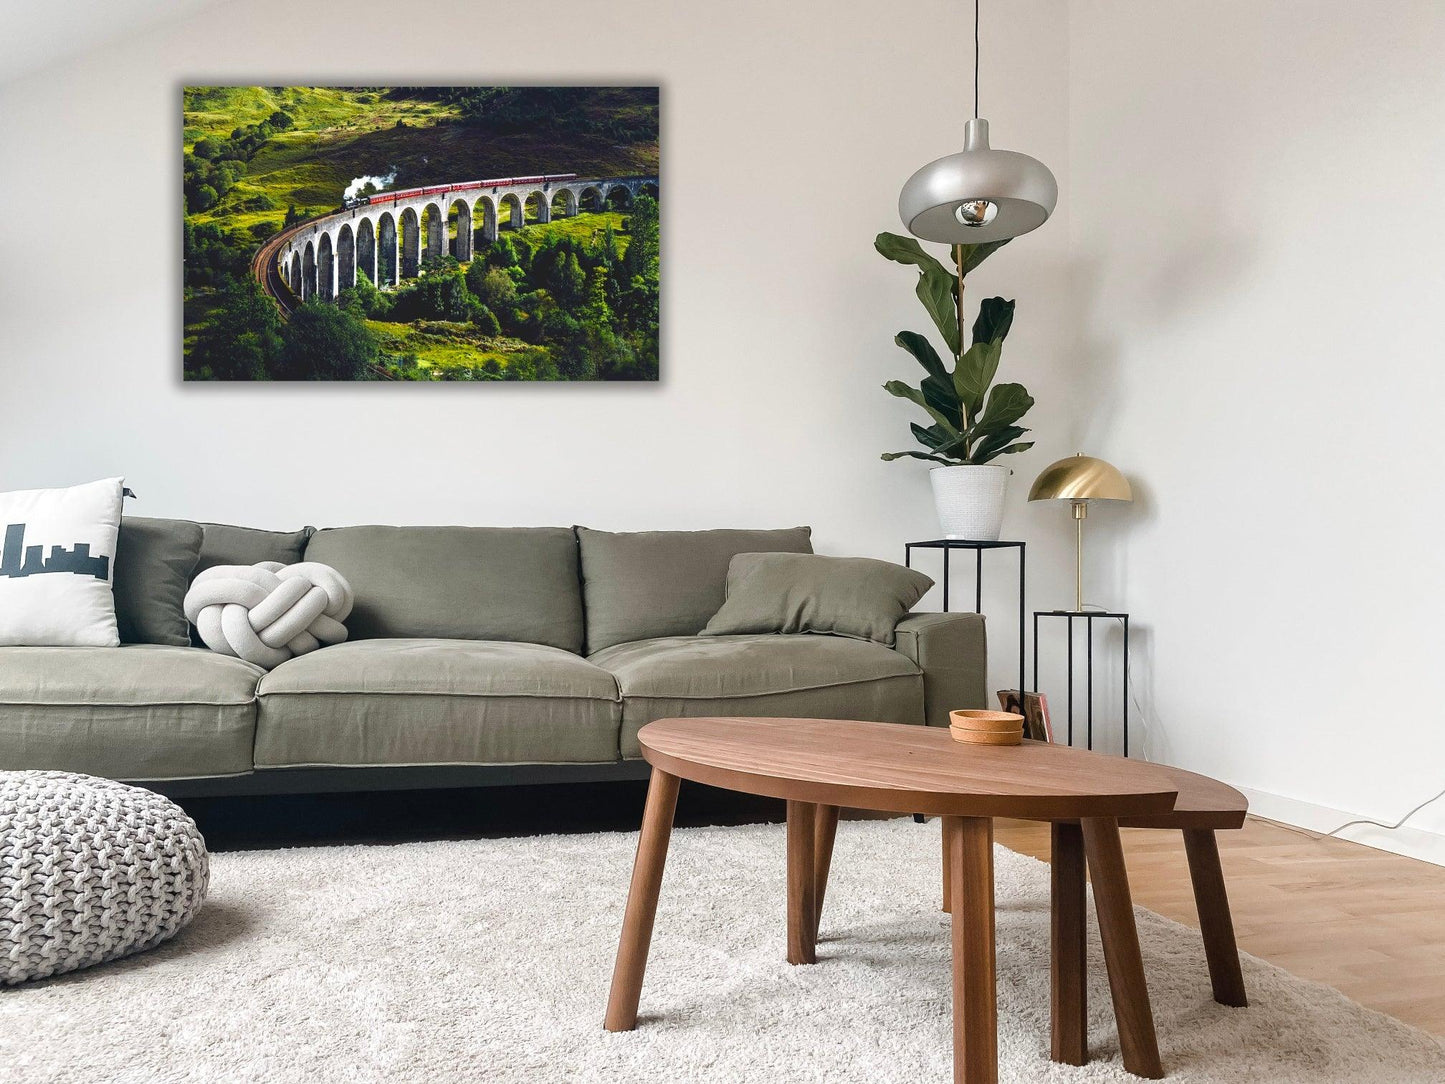 Steam Train Crossing Over Glenfinnan Viaduct in UK Canvas Wall Art Print Framed and Varnished Ready to Hang - Decoralin